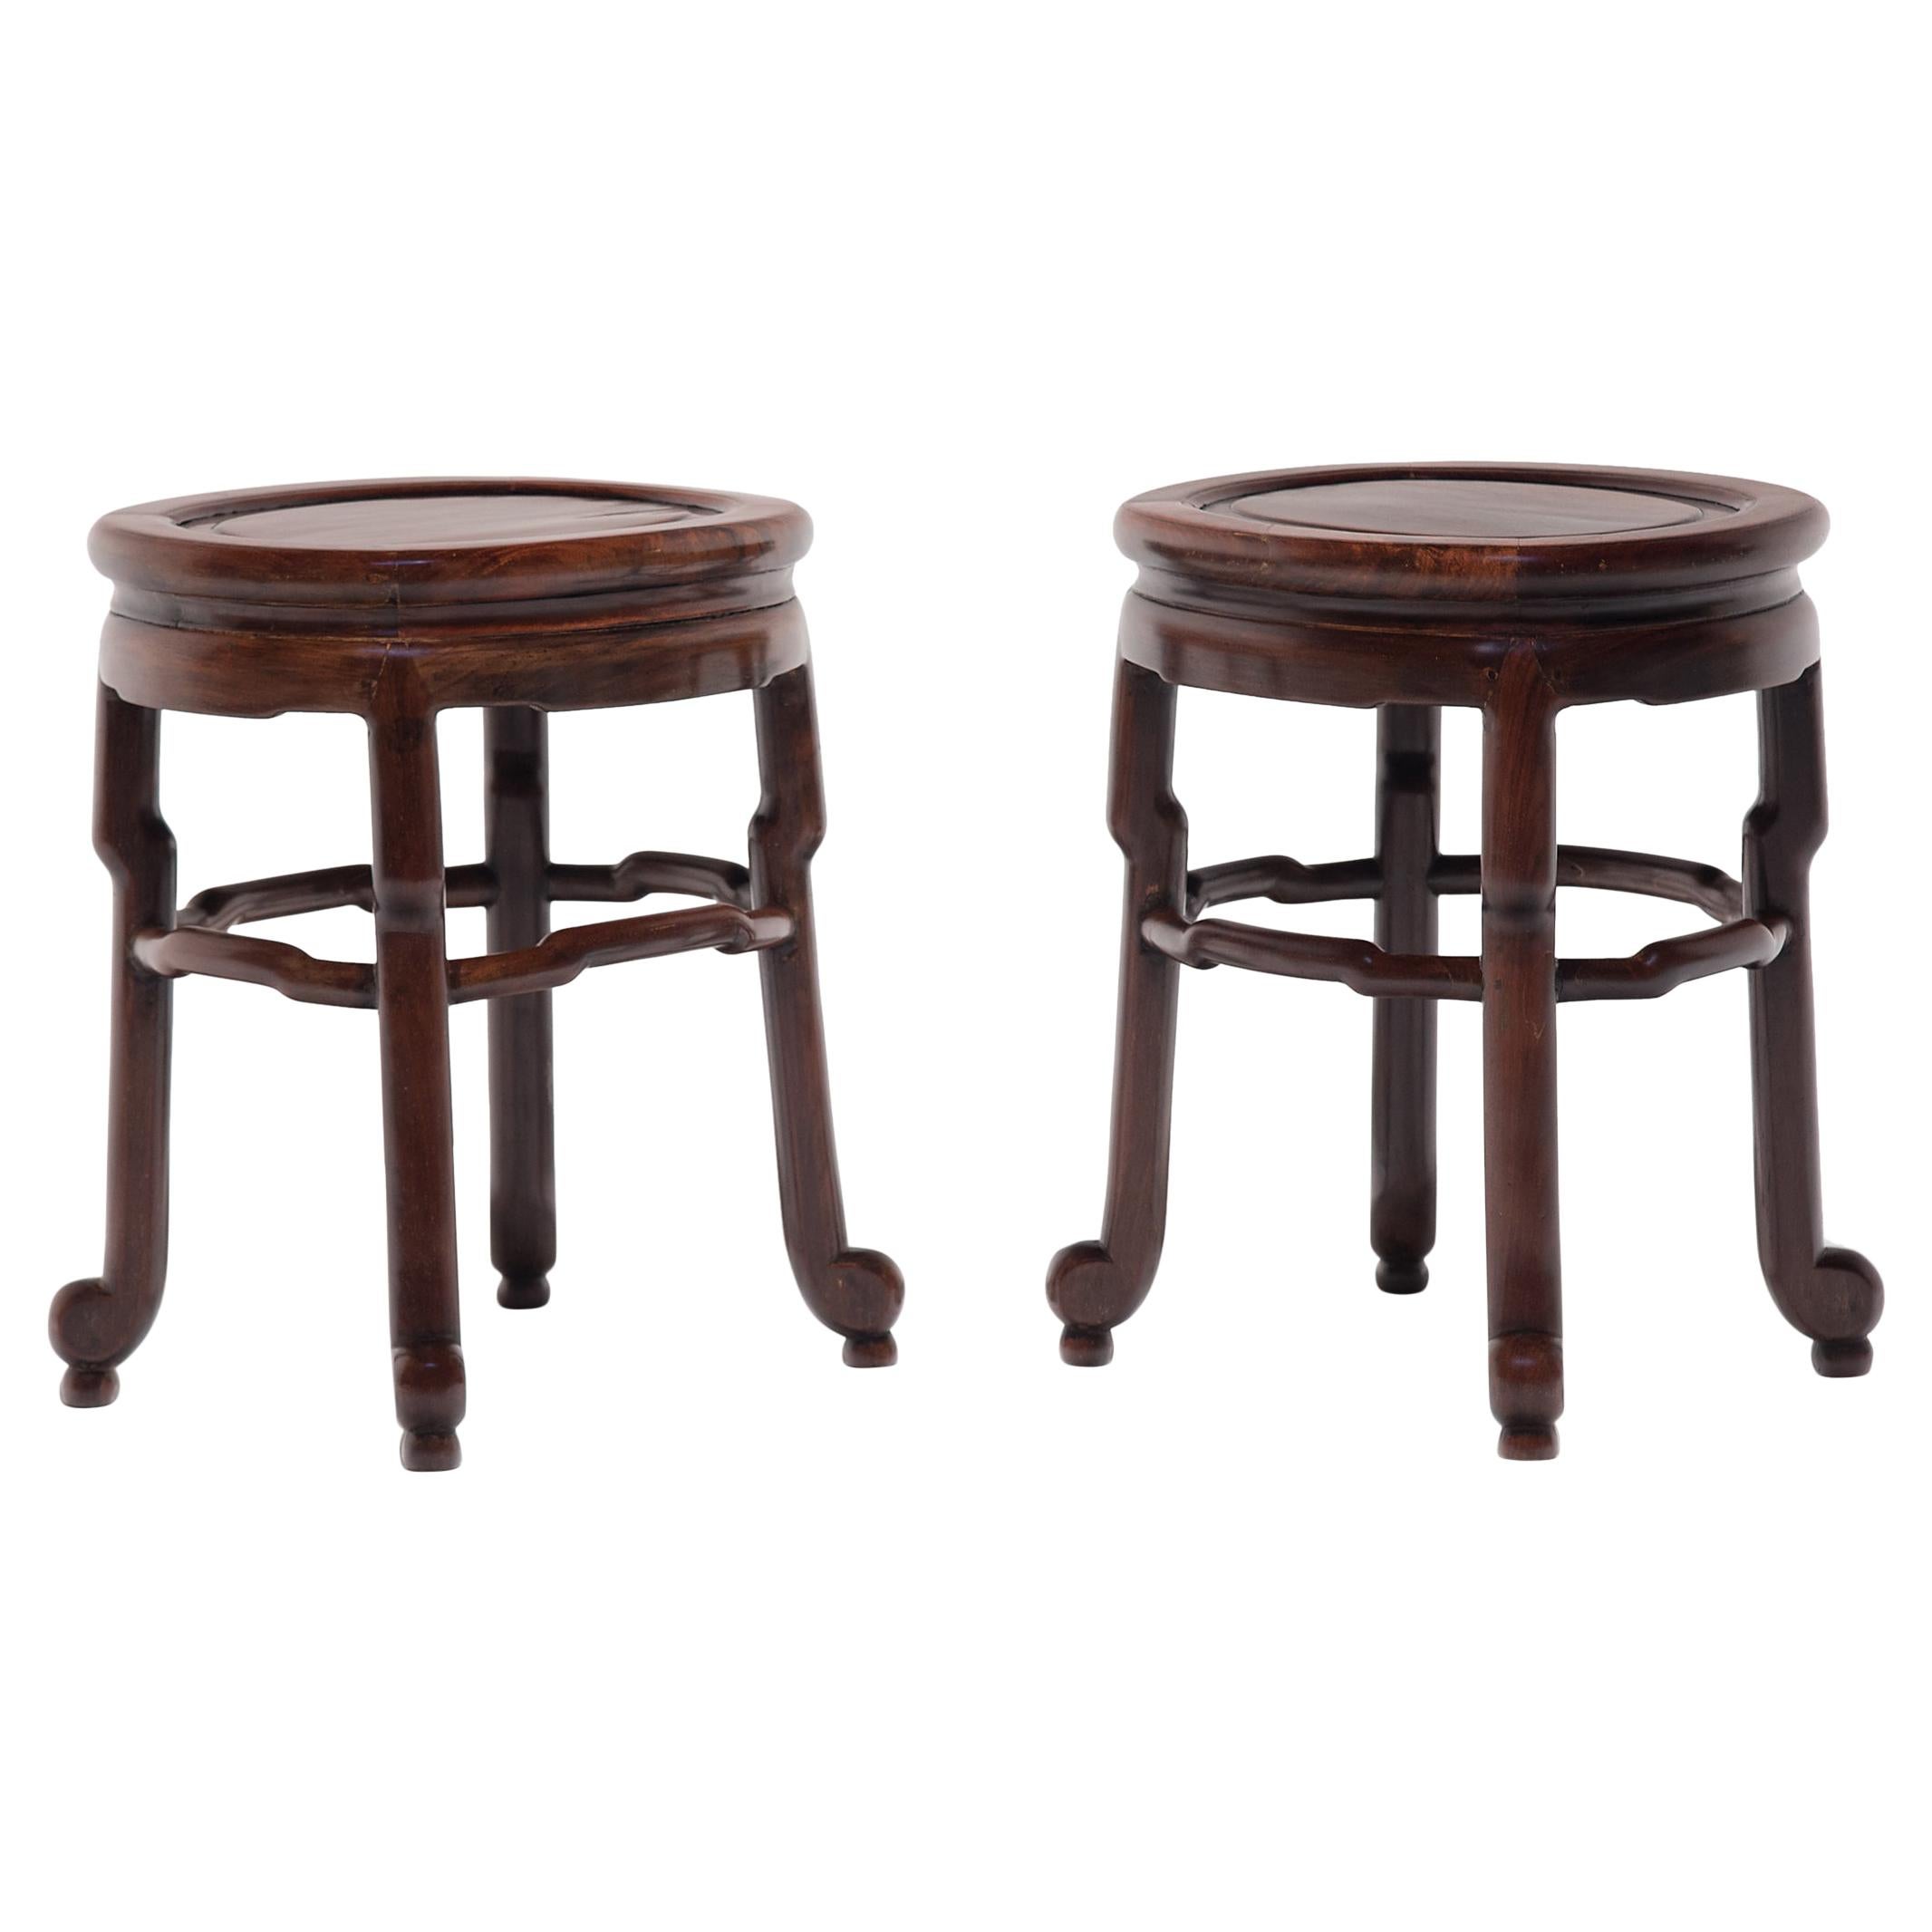 Pair of Chinese Art Deco Oval Stools, c. 1900 For Sale